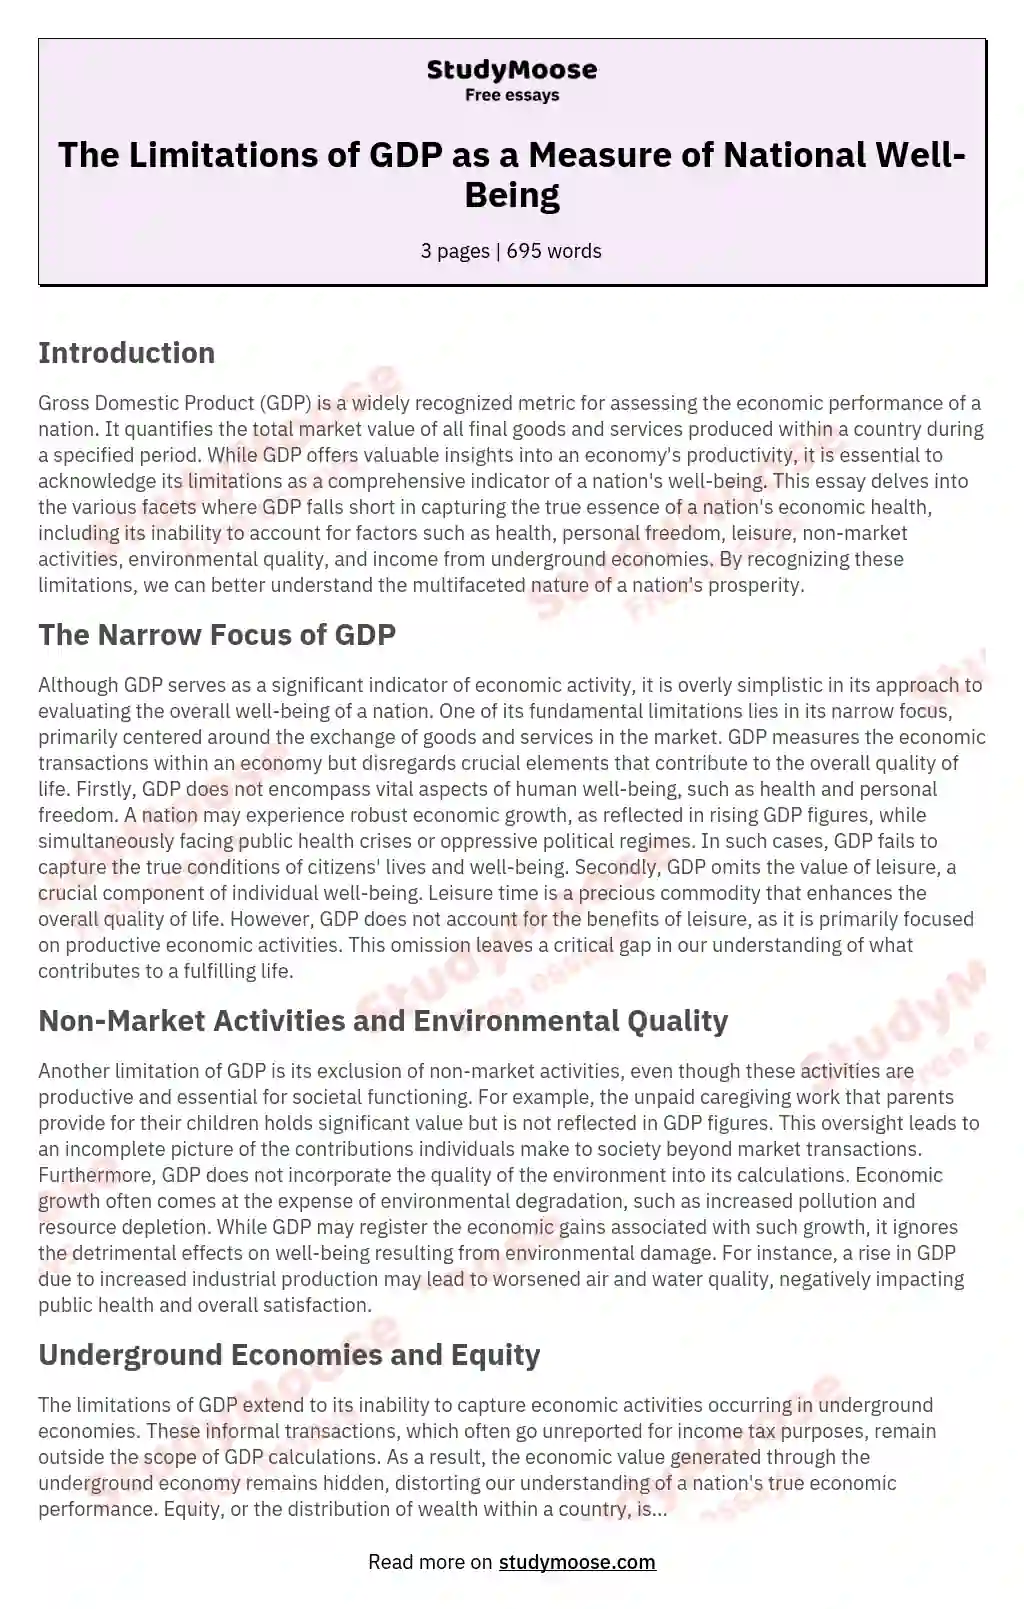 The Limitations of GDP as a Measure of National Well-Being essay